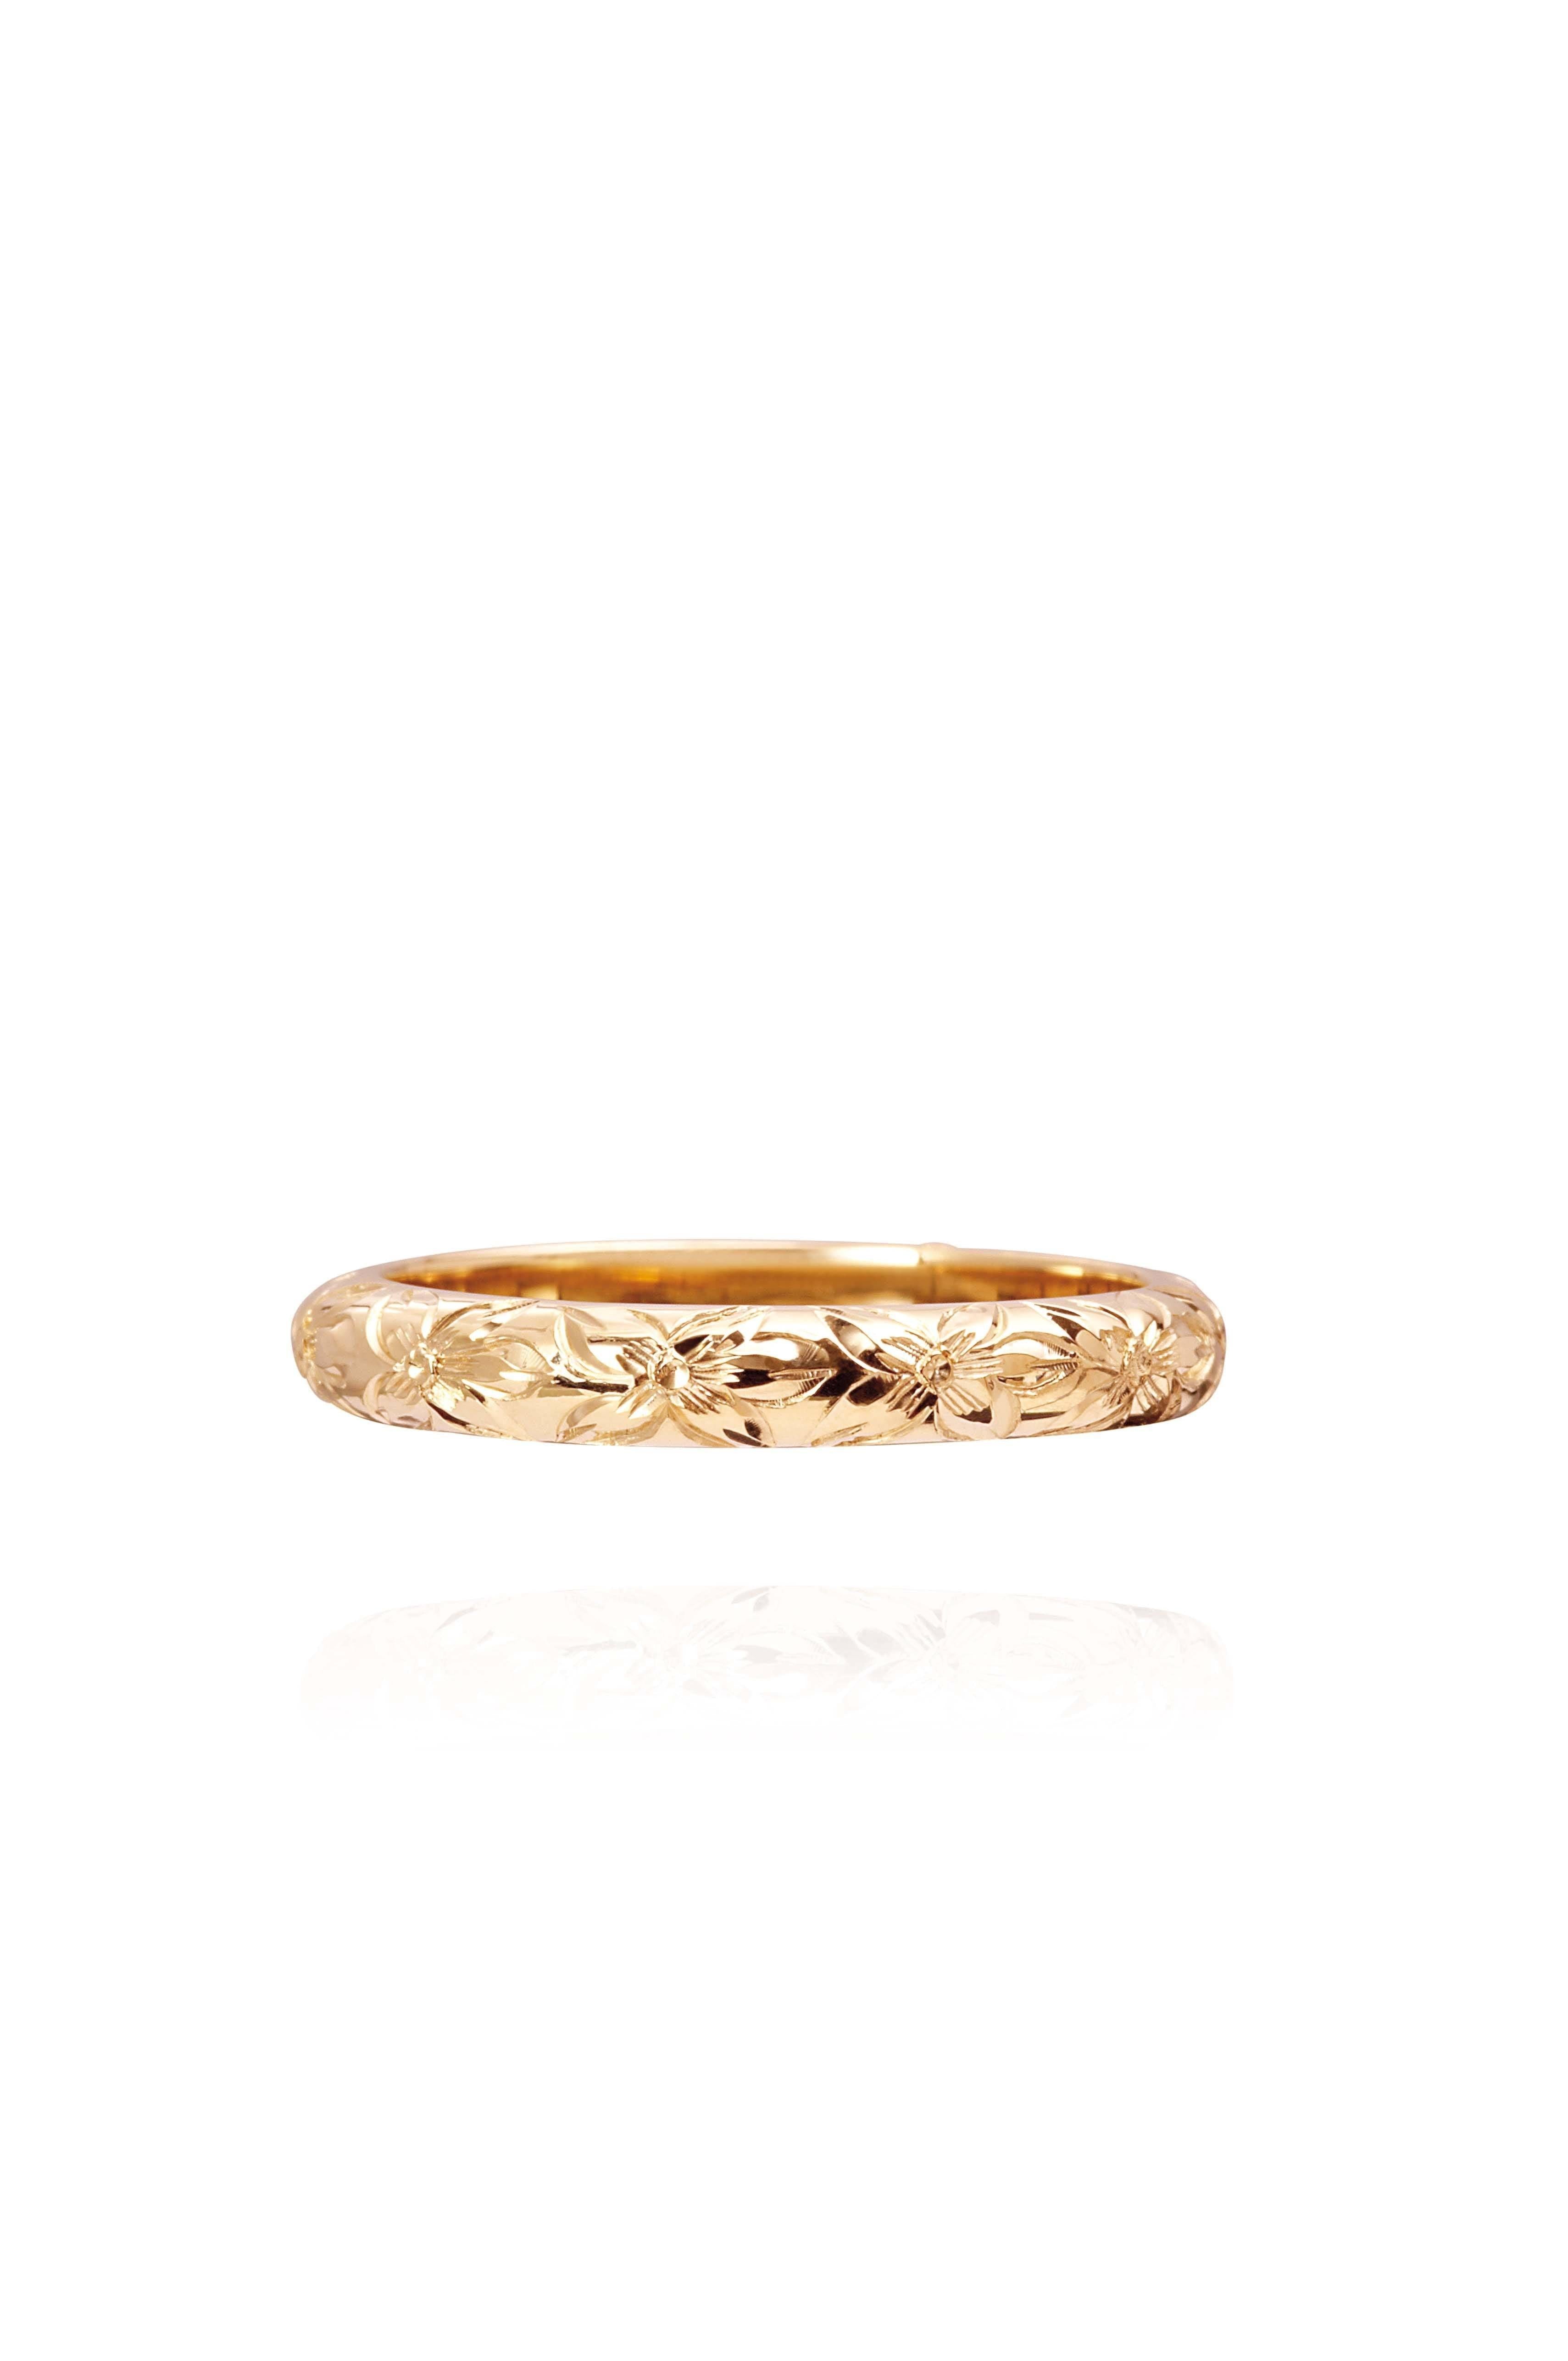 In this photo there is a yellow gold lei ring with flower hand-engravings.